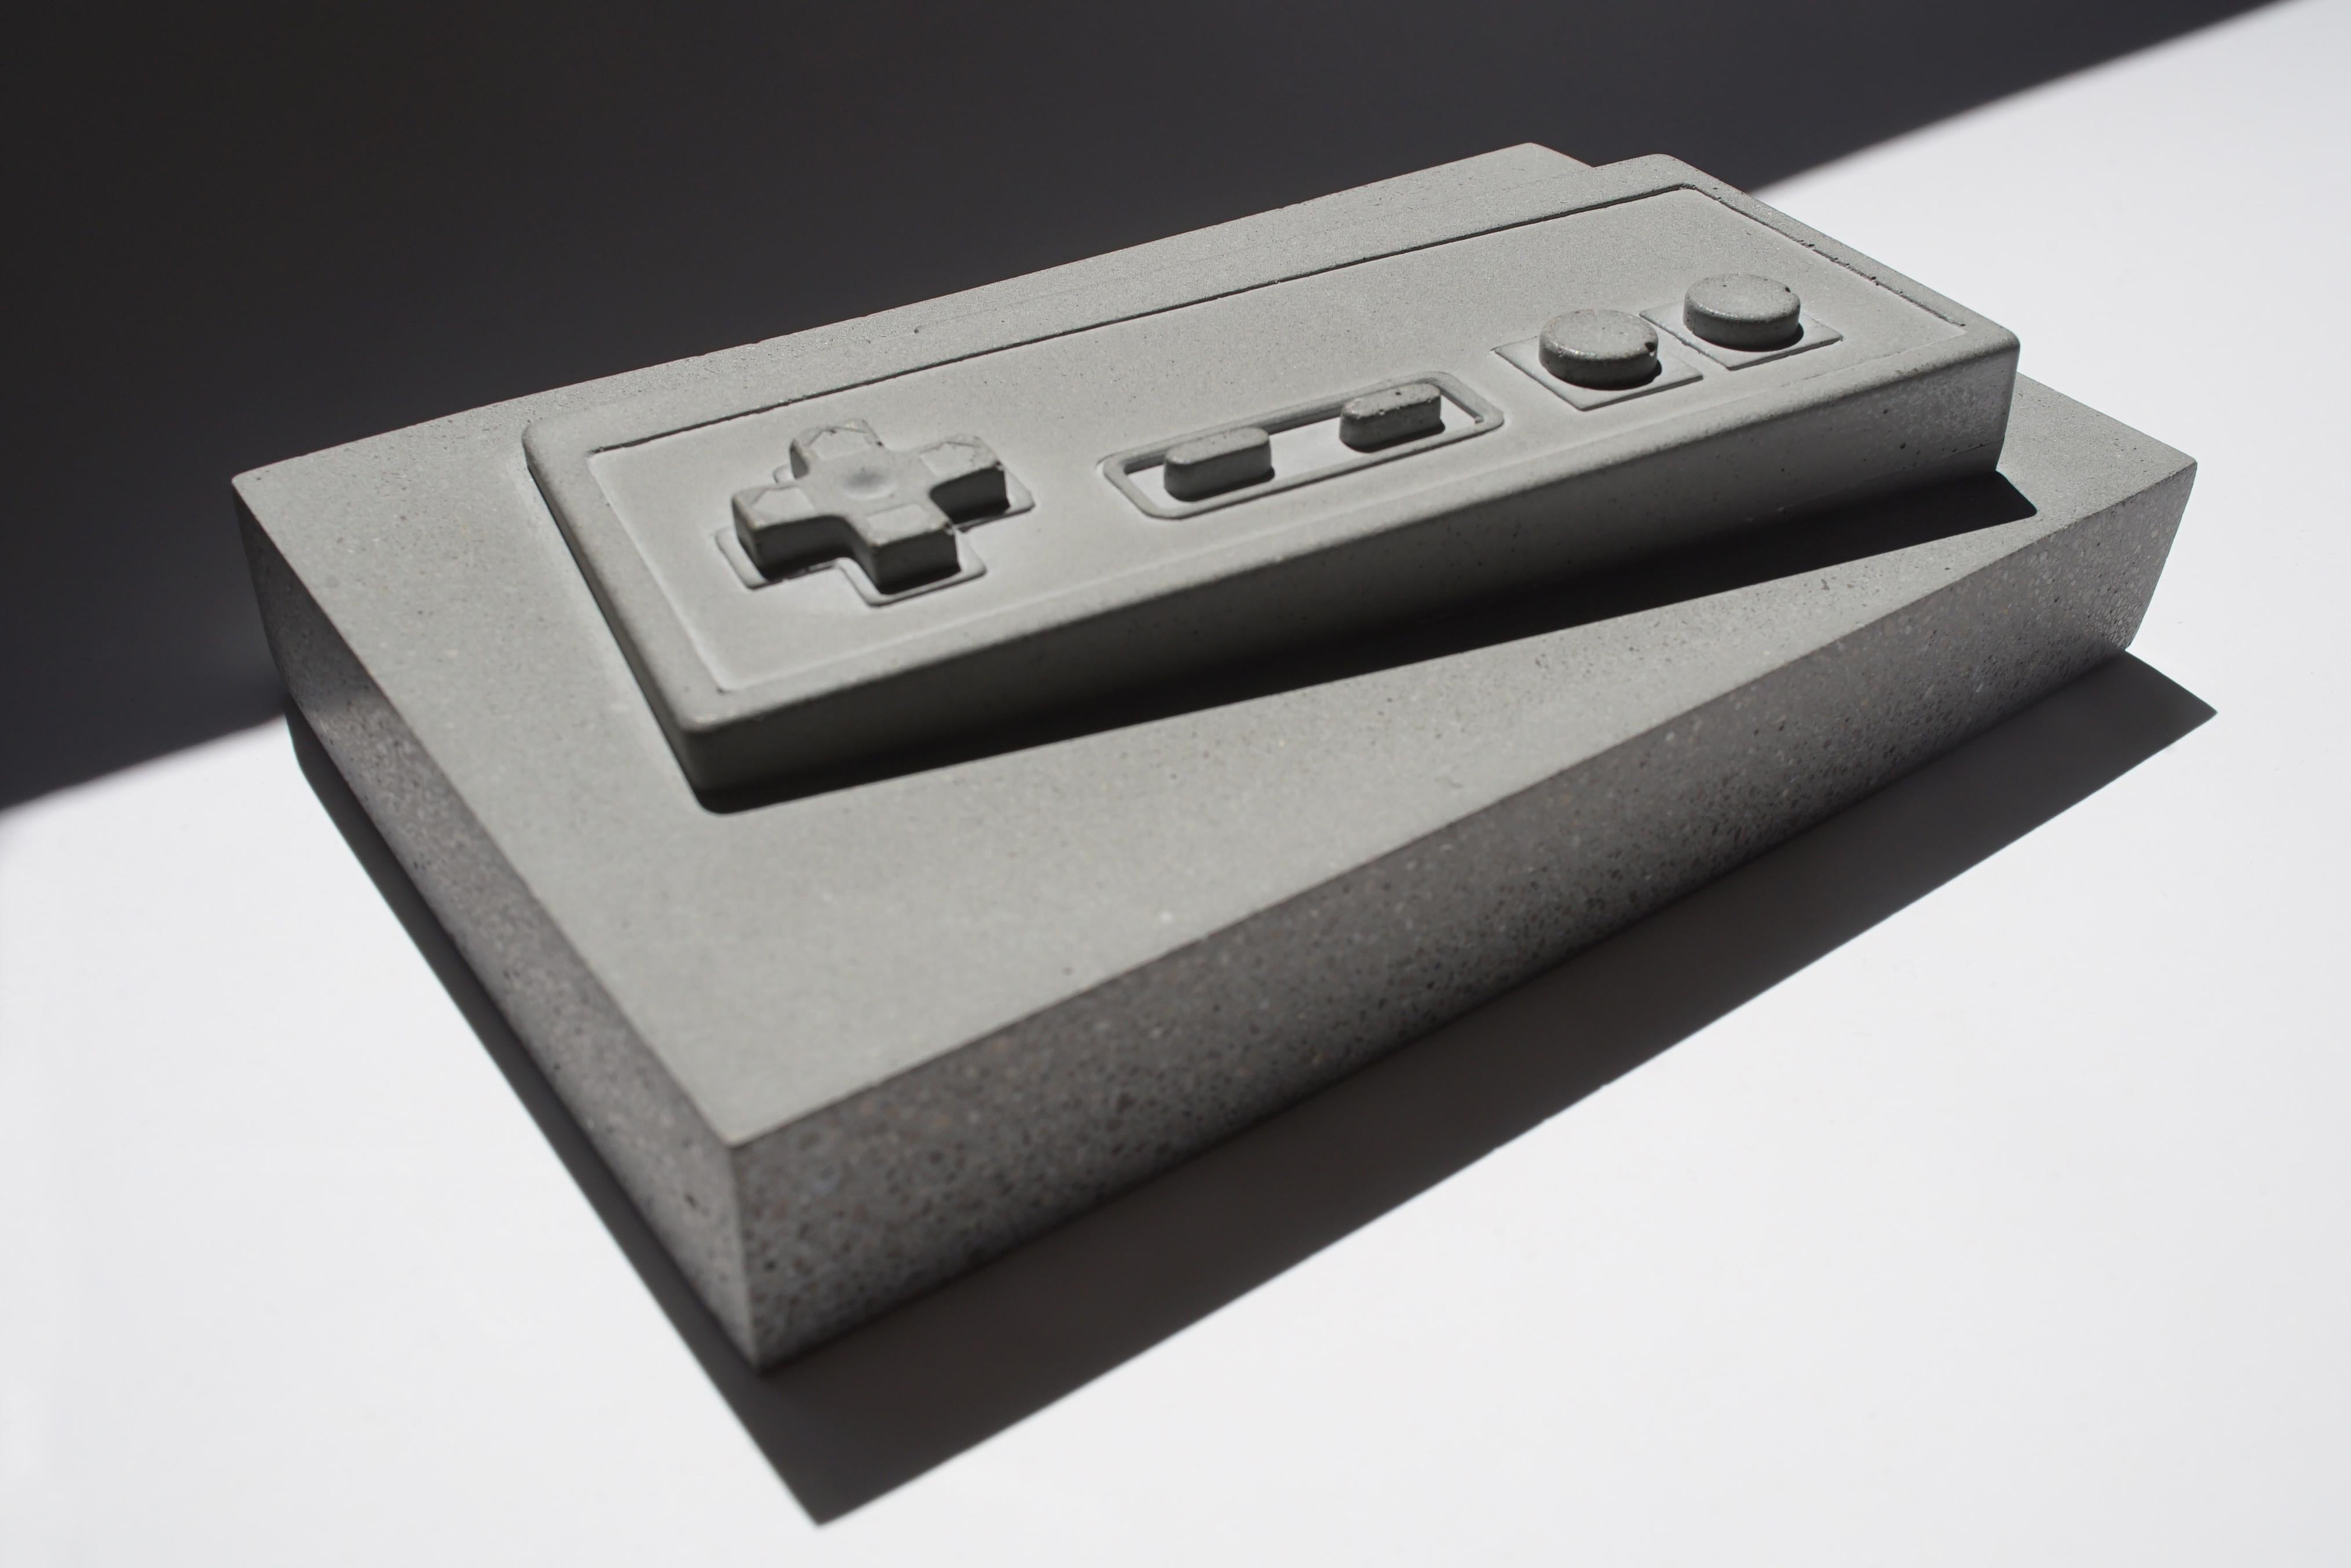 The Video Game Console 1985 - Sculpture by REGULAR CONCRETE